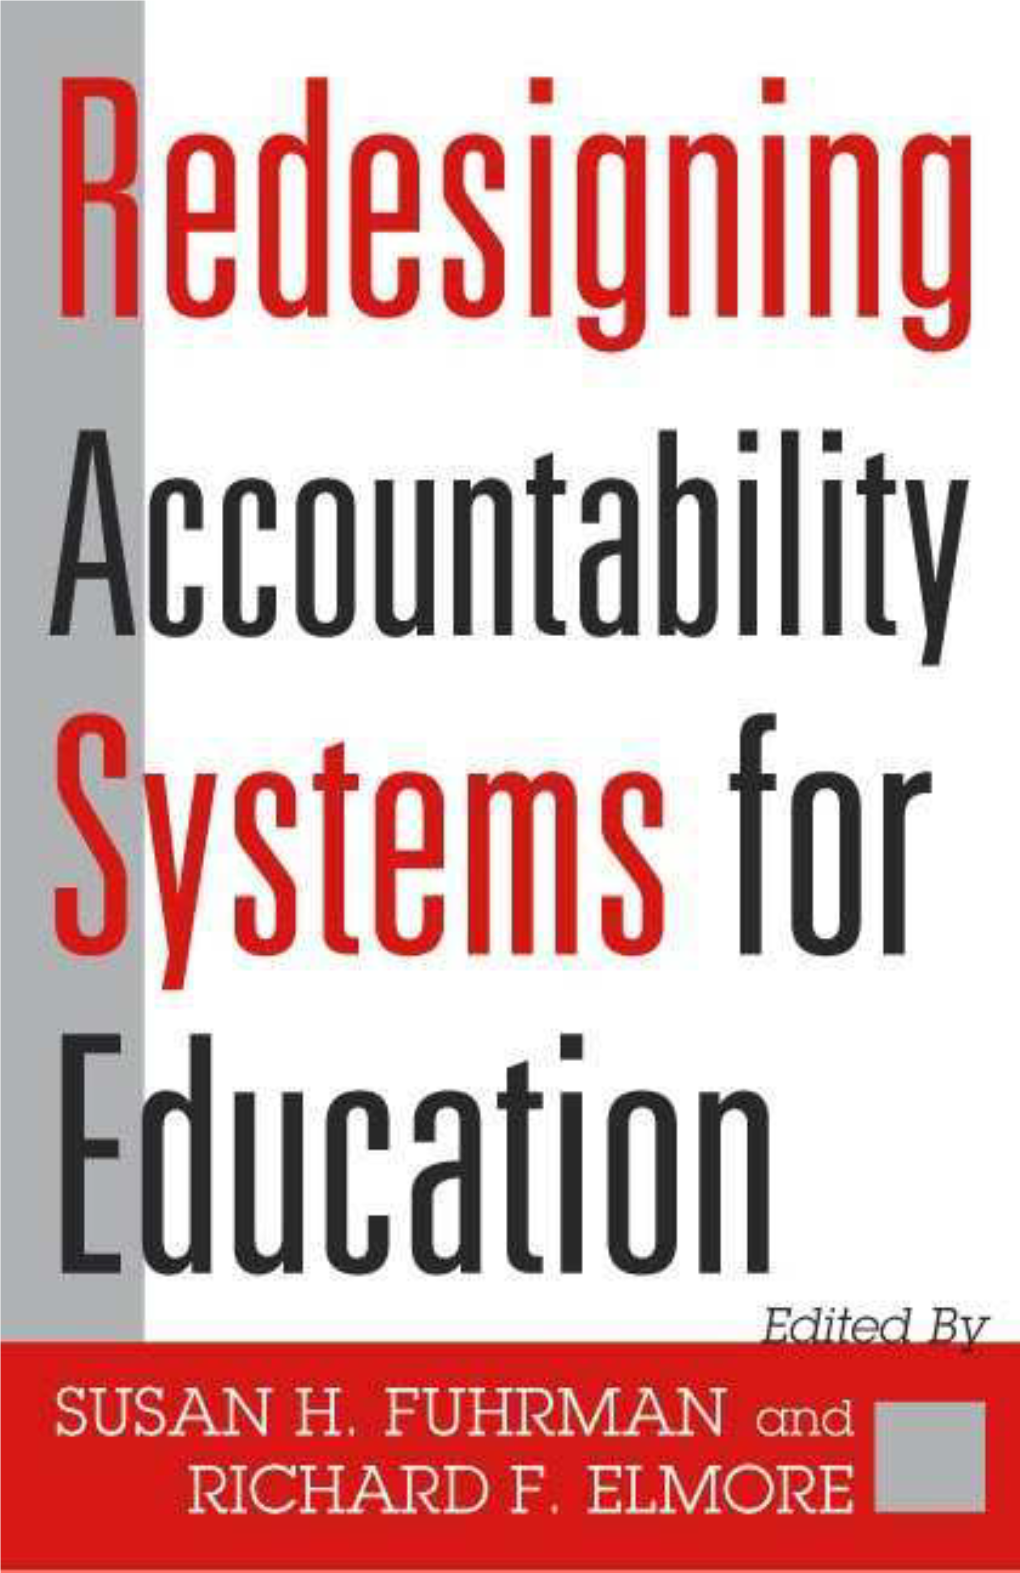 Redesigning Accountability Systems for Education SUSAN H